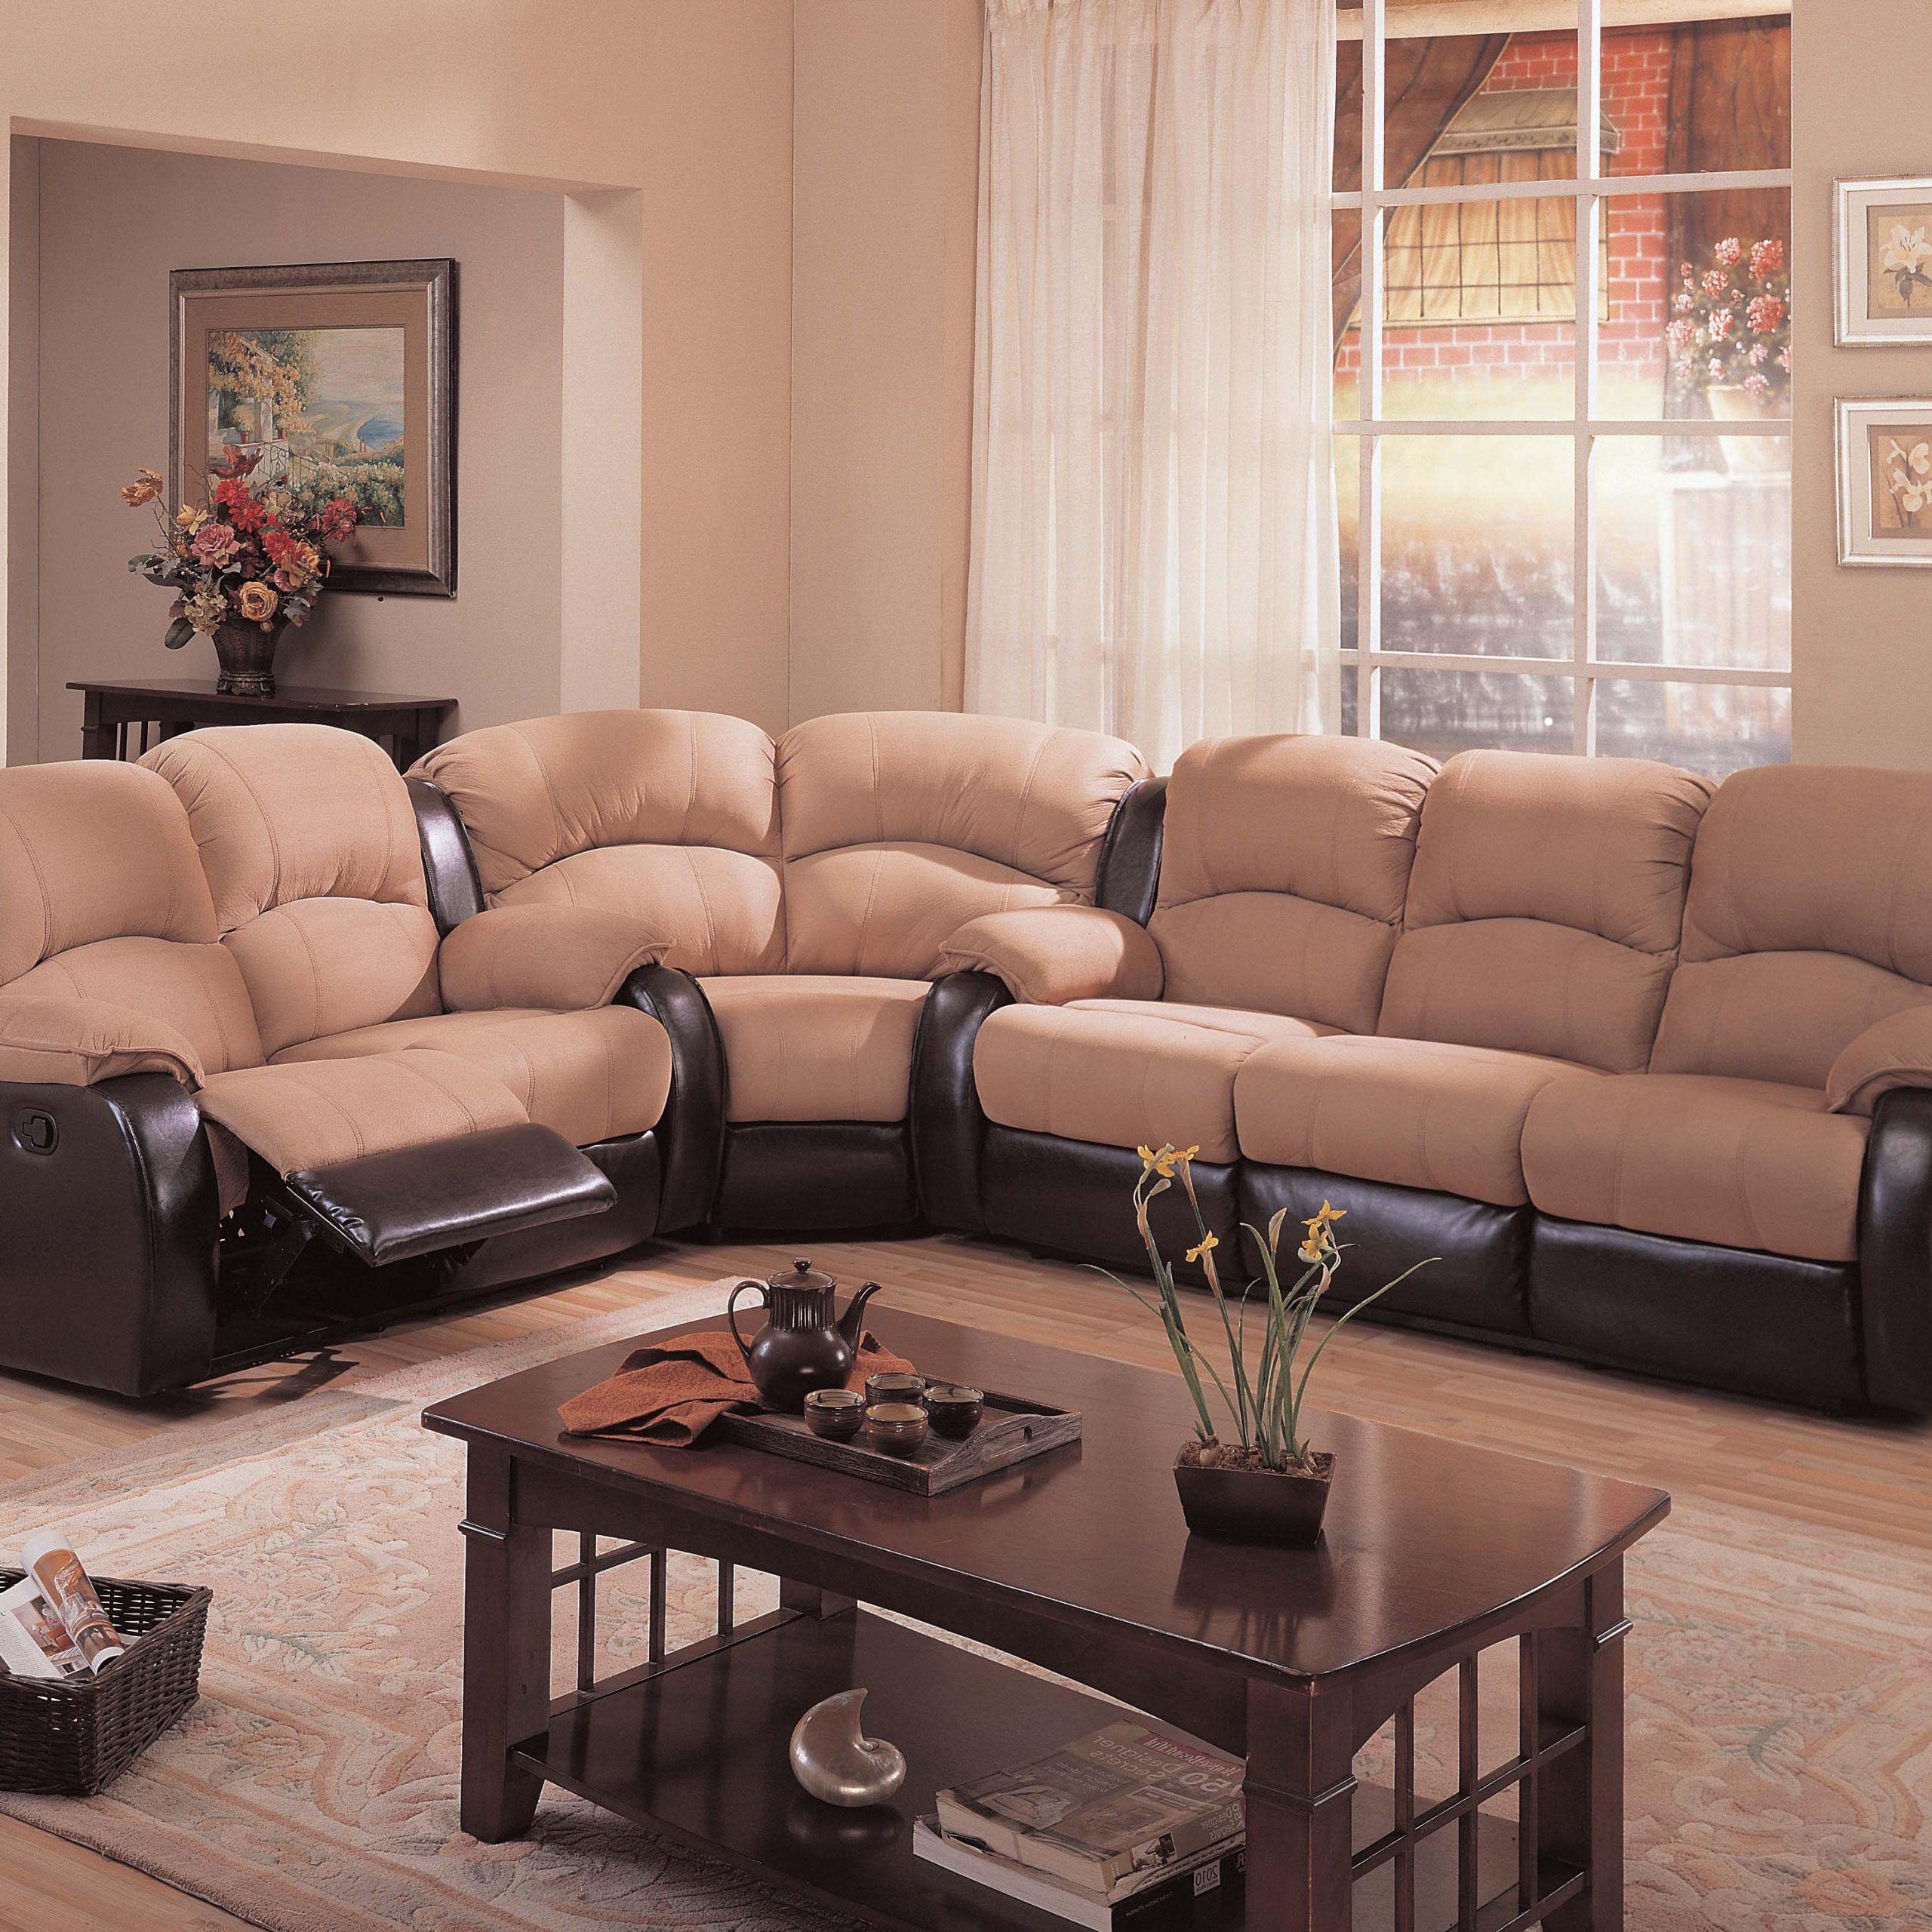 Microfiber Sectional Couch With Recliner: Chic Features For Your Home In Microfiber Sectional Corner Sofas (View 5 of 20)